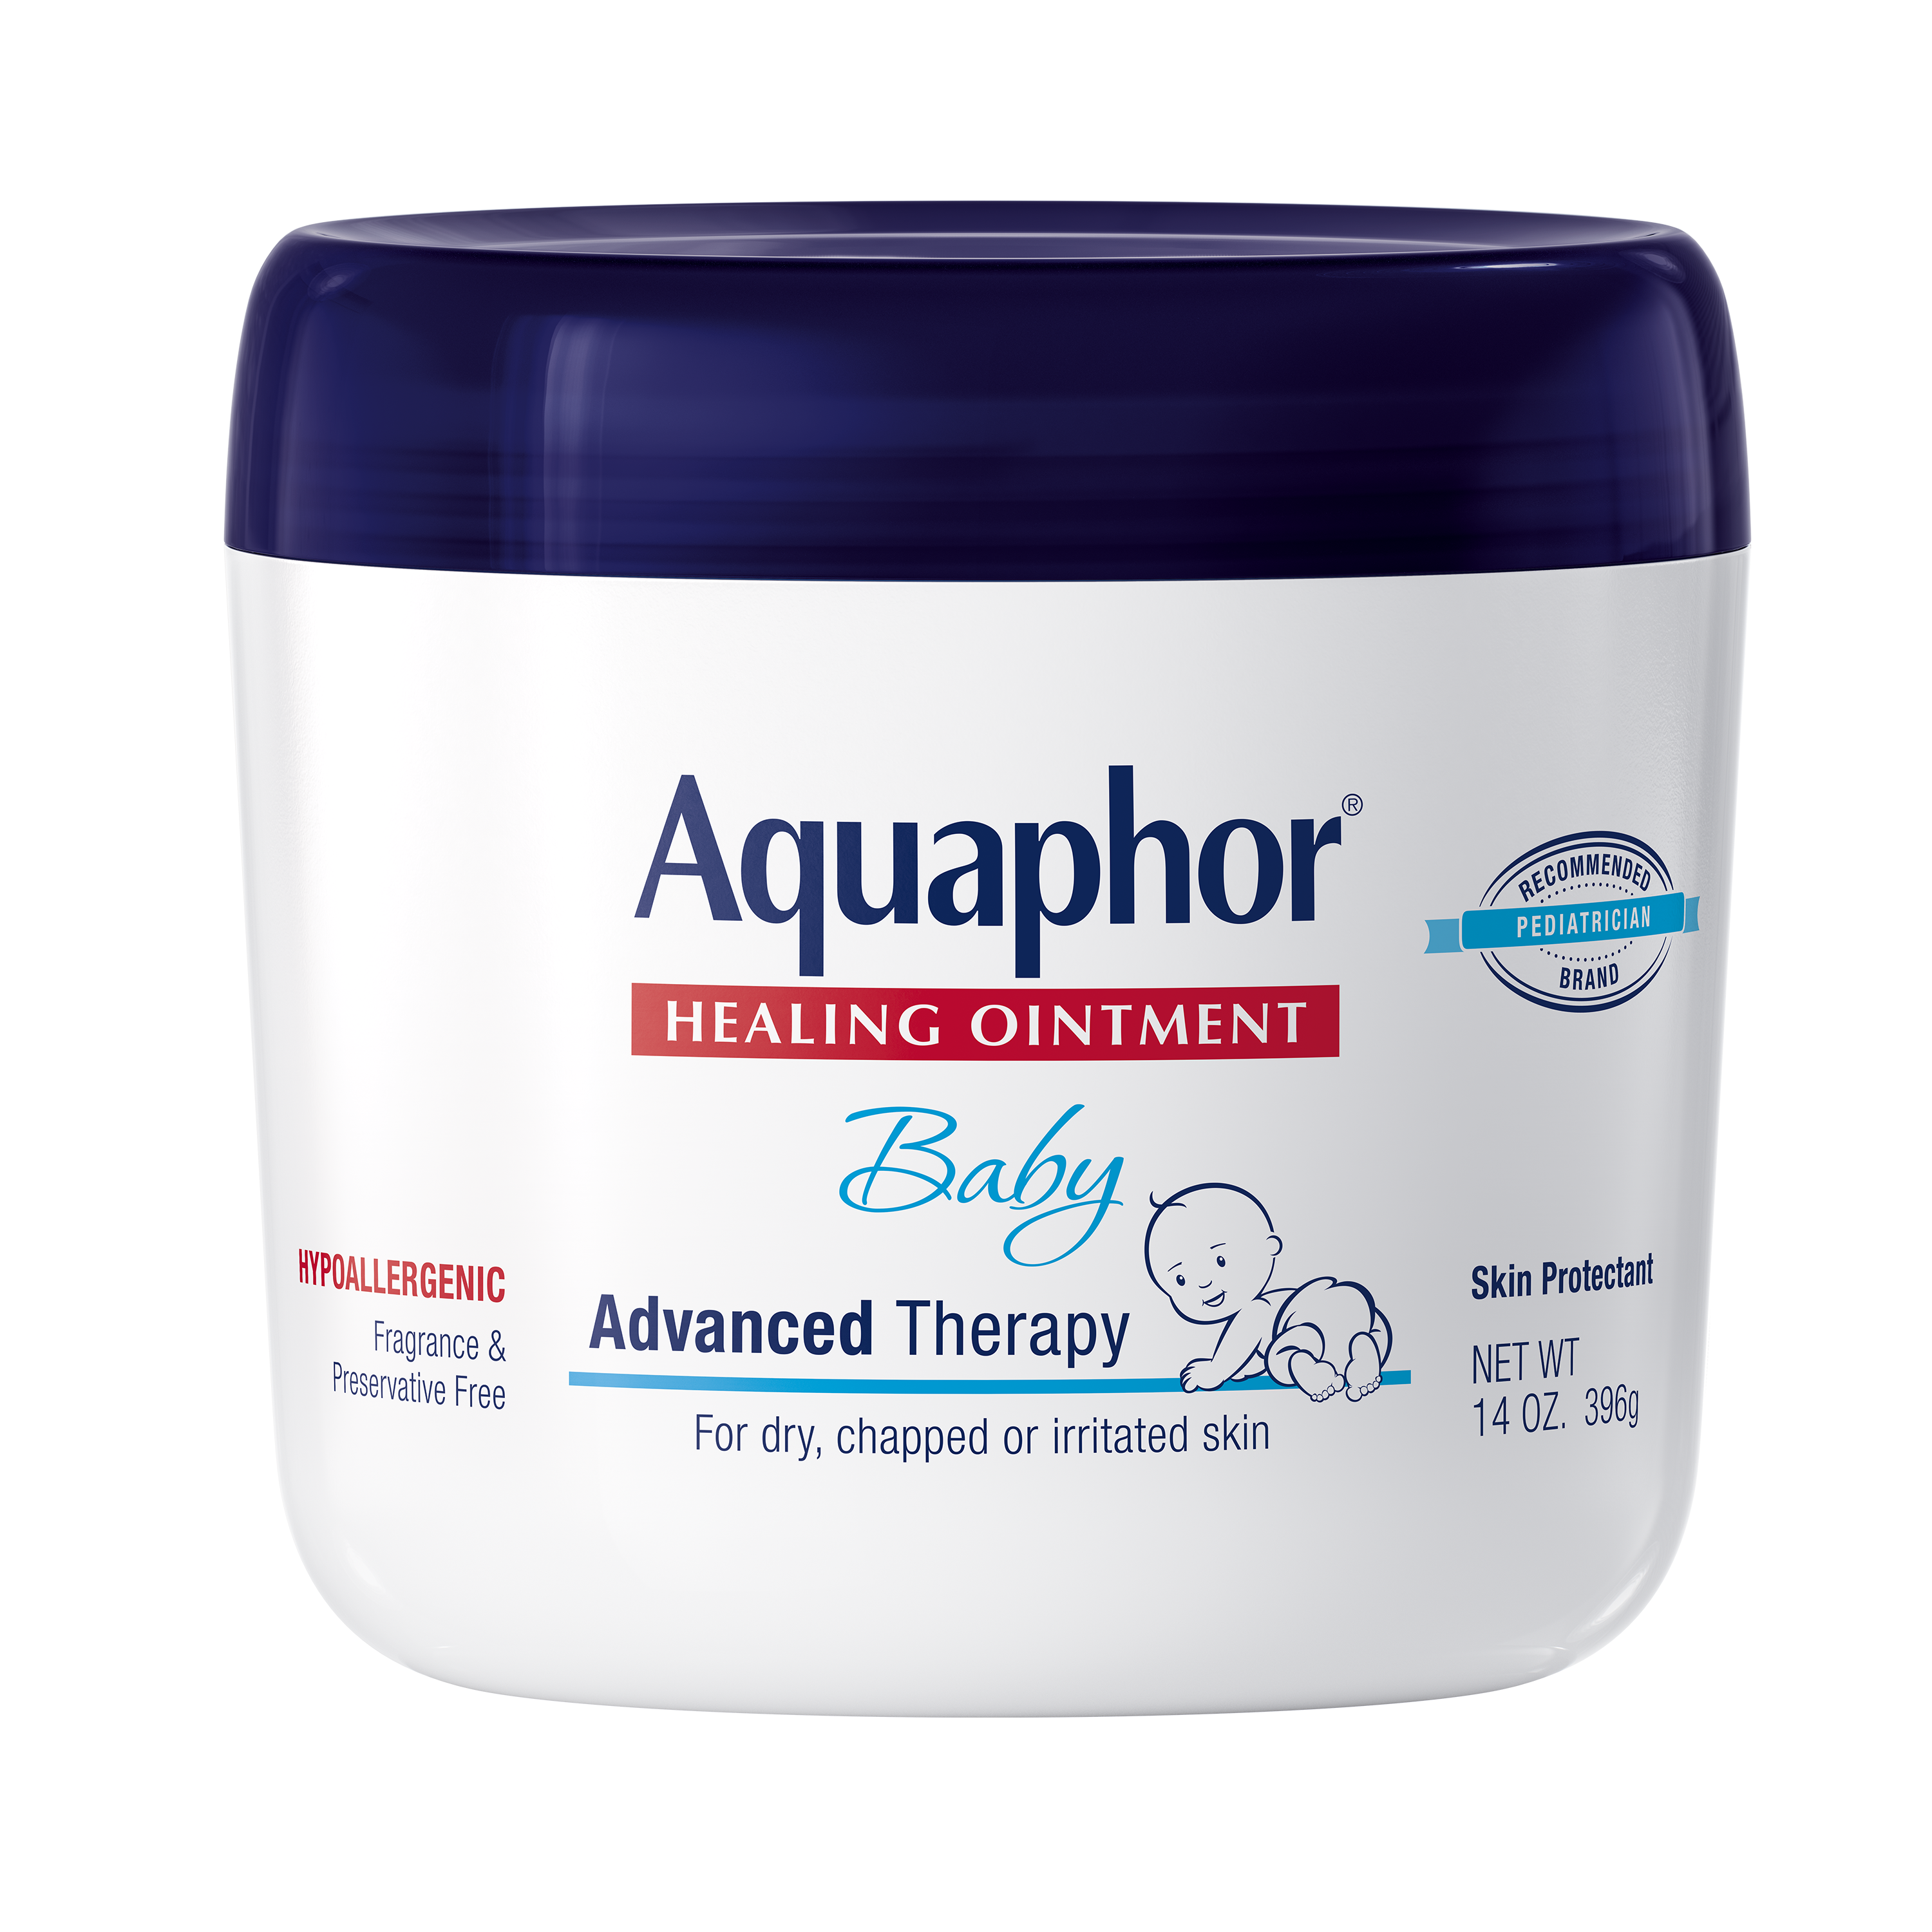 Aquaphor Baby Healing Ointment Advanced Therapy Skin Protectant, Dry Skin and Diaper Rash Ointment, 14 Oz Jar - image 1 of 12